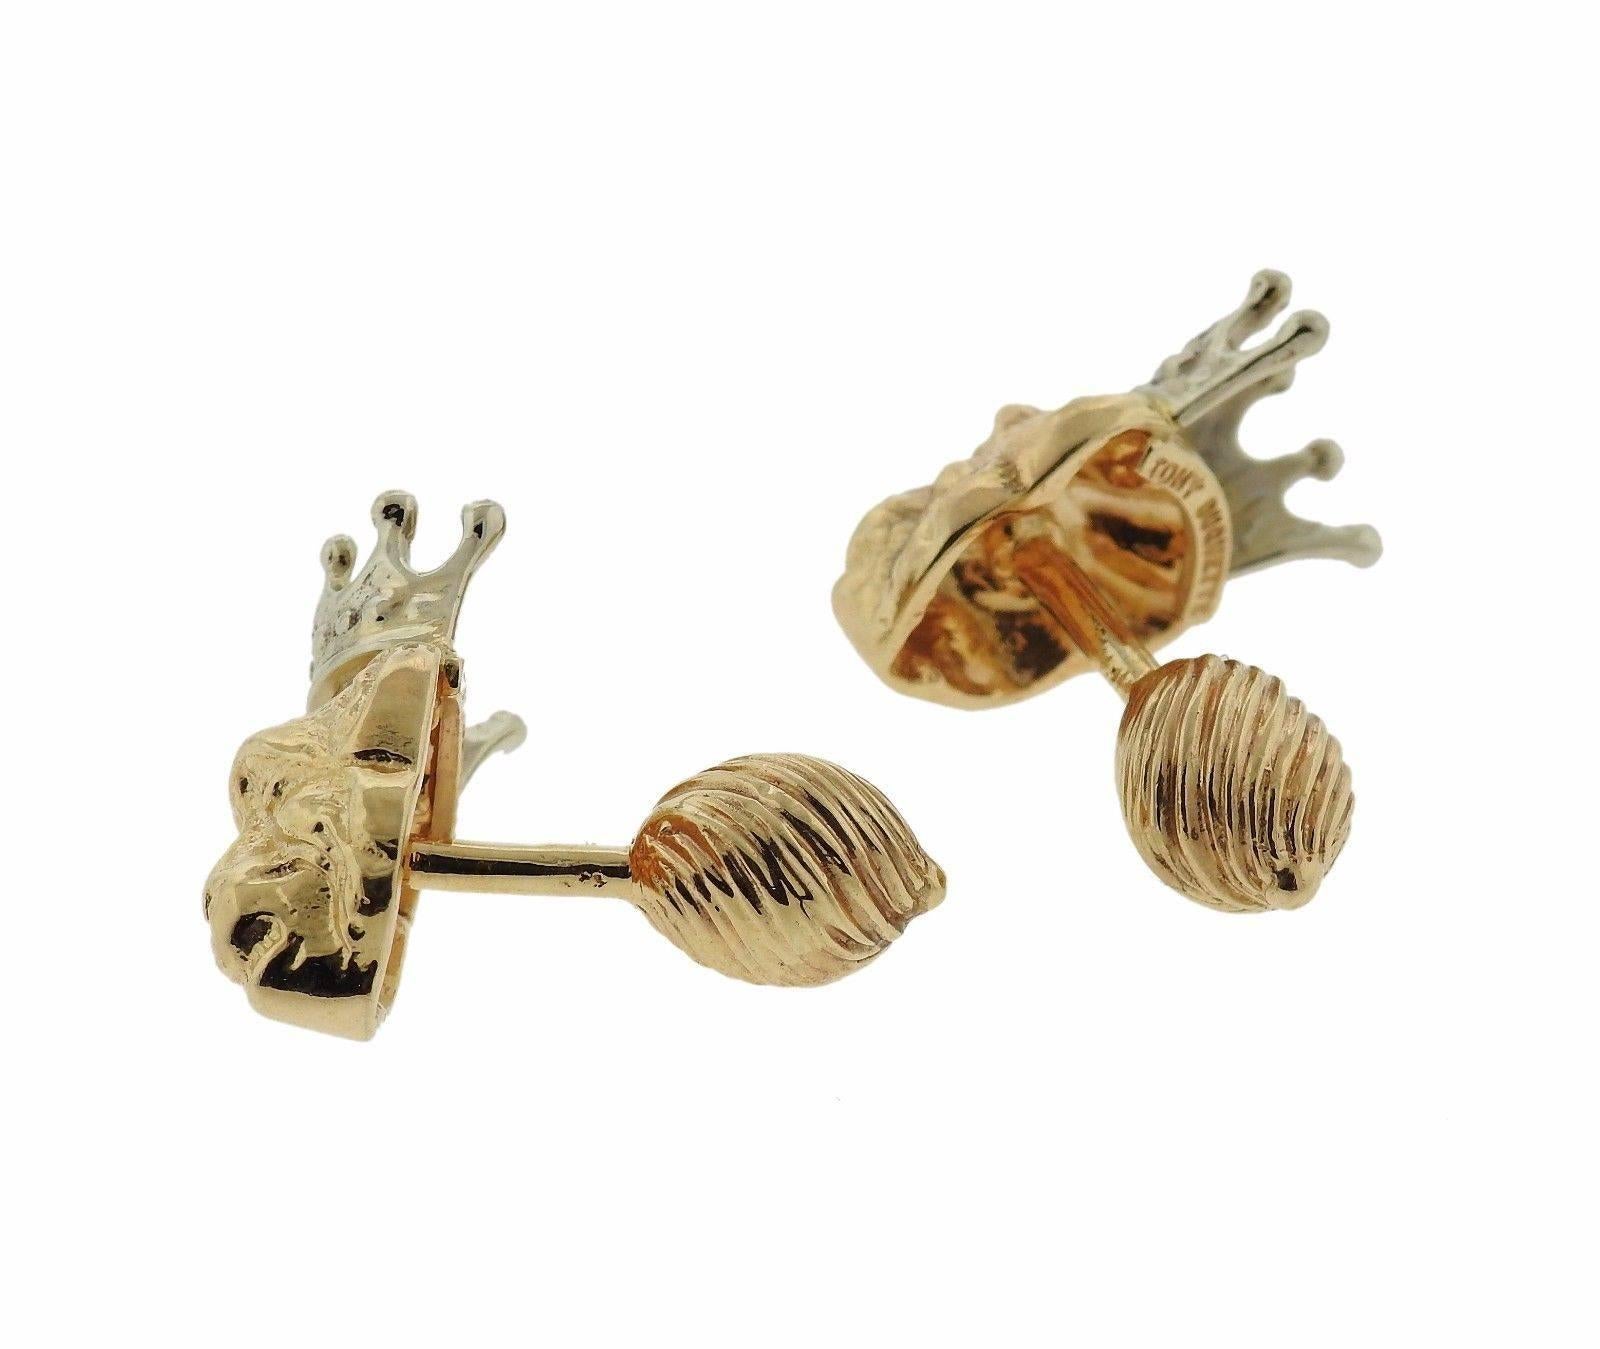 A pair of 14k gold monkey cufflinks by Tony Duquette.  The cufflinks measure 22mm x 13mm and weigh 21.7 grams.  Marked: Tony Duquette.